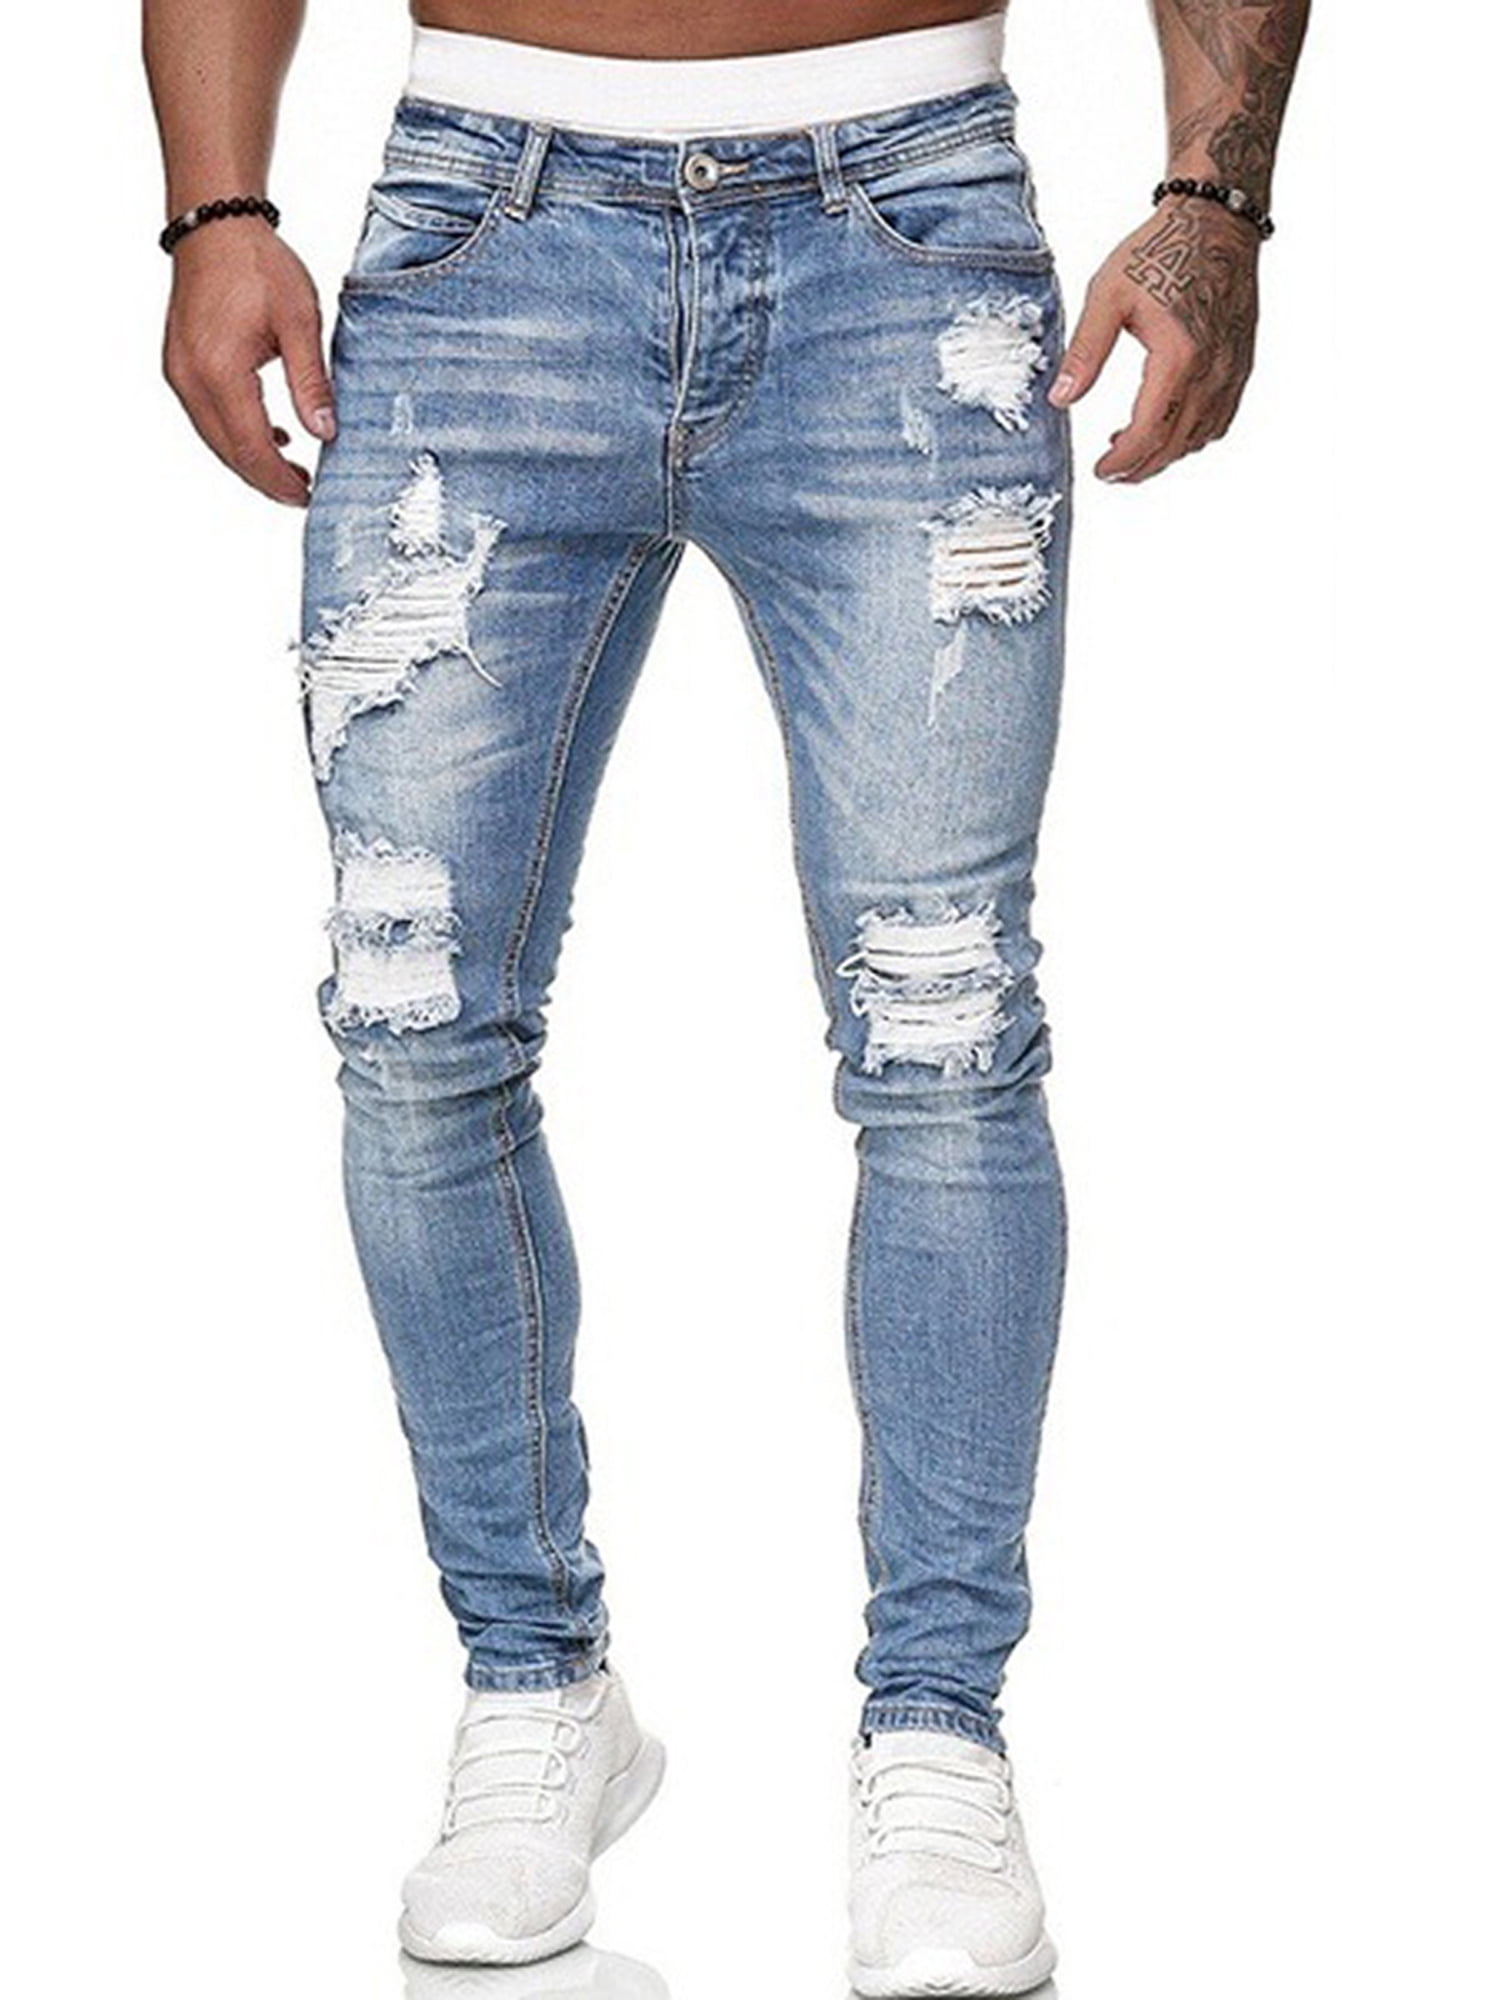 Mens Skinny Ripped Jeans Denim Pants Casual Stretch Slim Fit Hip Hop  Trousers | eBay